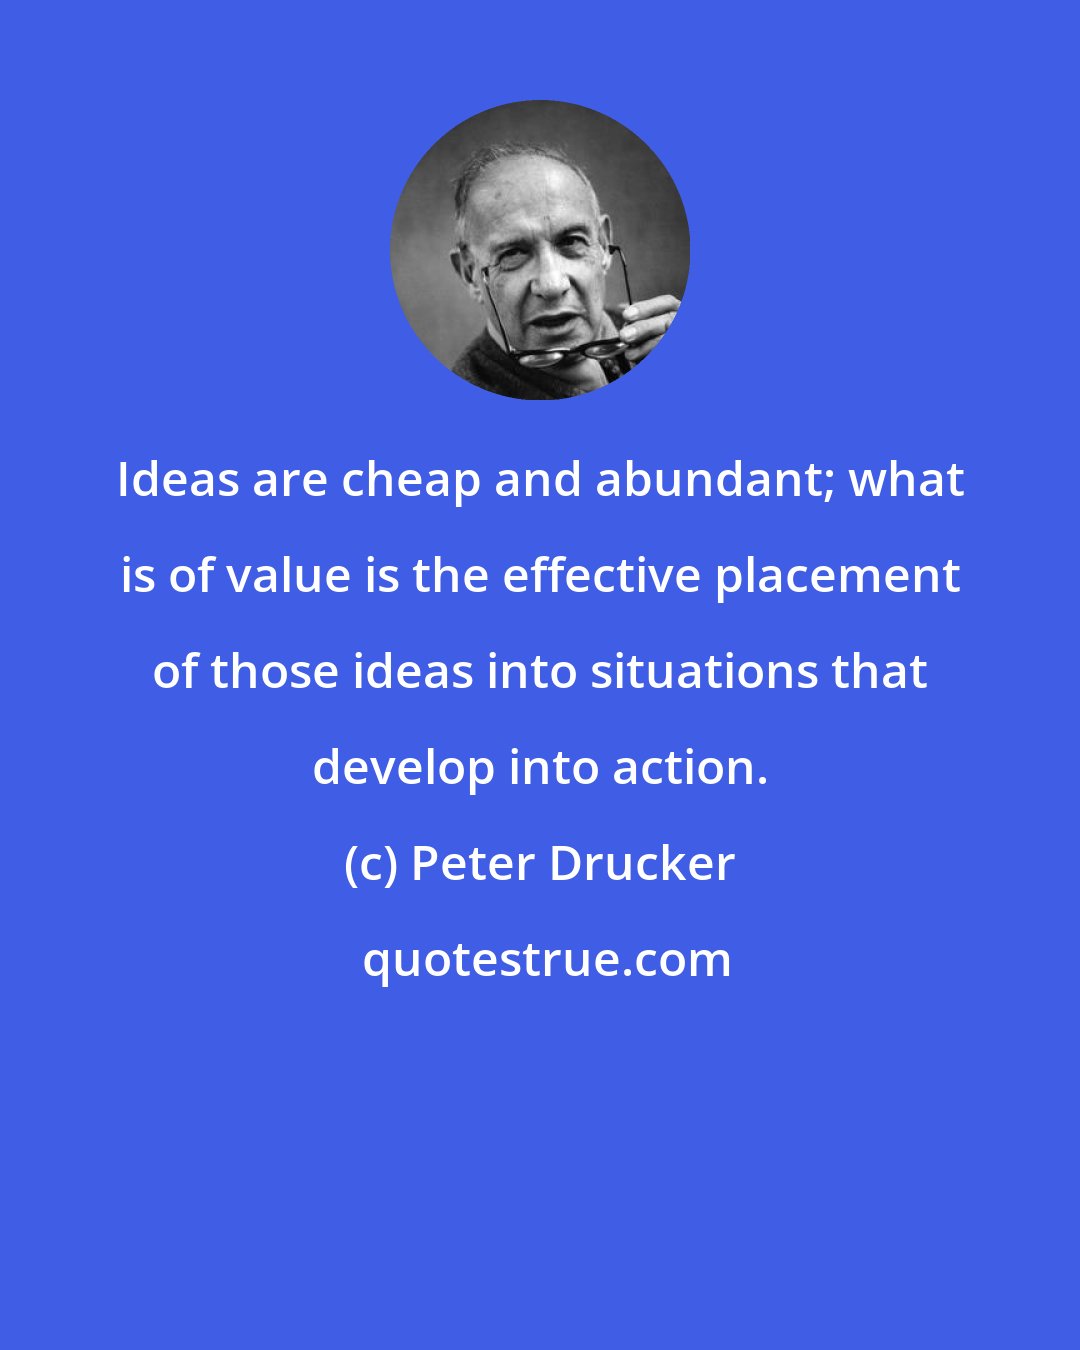 Peter Drucker: Ideas are cheap and abundant; what is of value is the effective placement of those ideas into situations that develop into action.